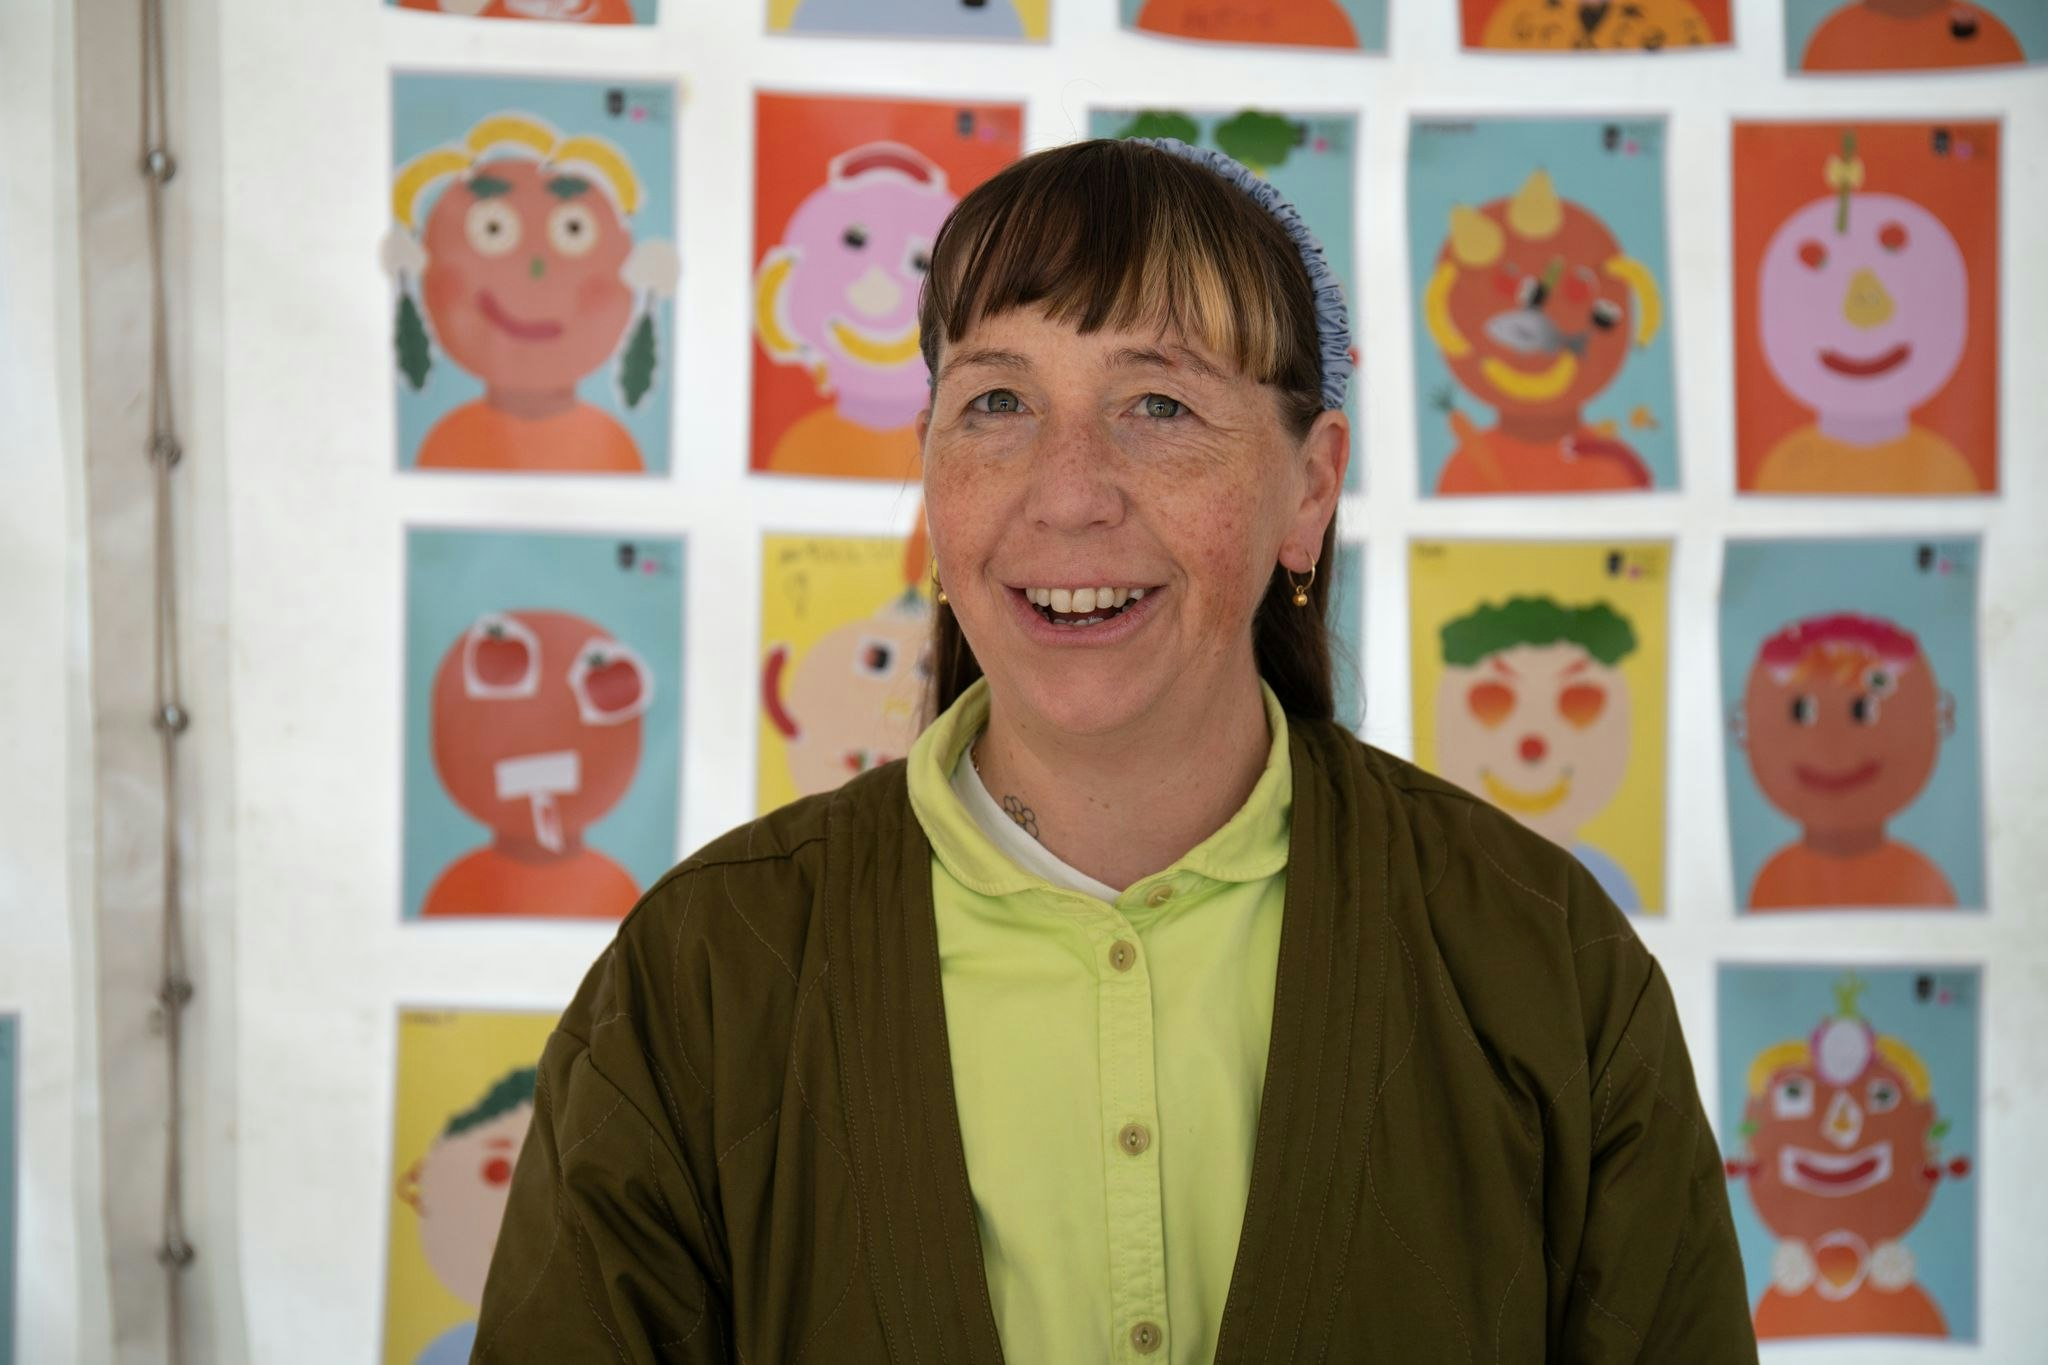 Artist Beci Orpin smiles at the camera. She wears a green jacket. Behind her hangs a series of food collage pictures by children.